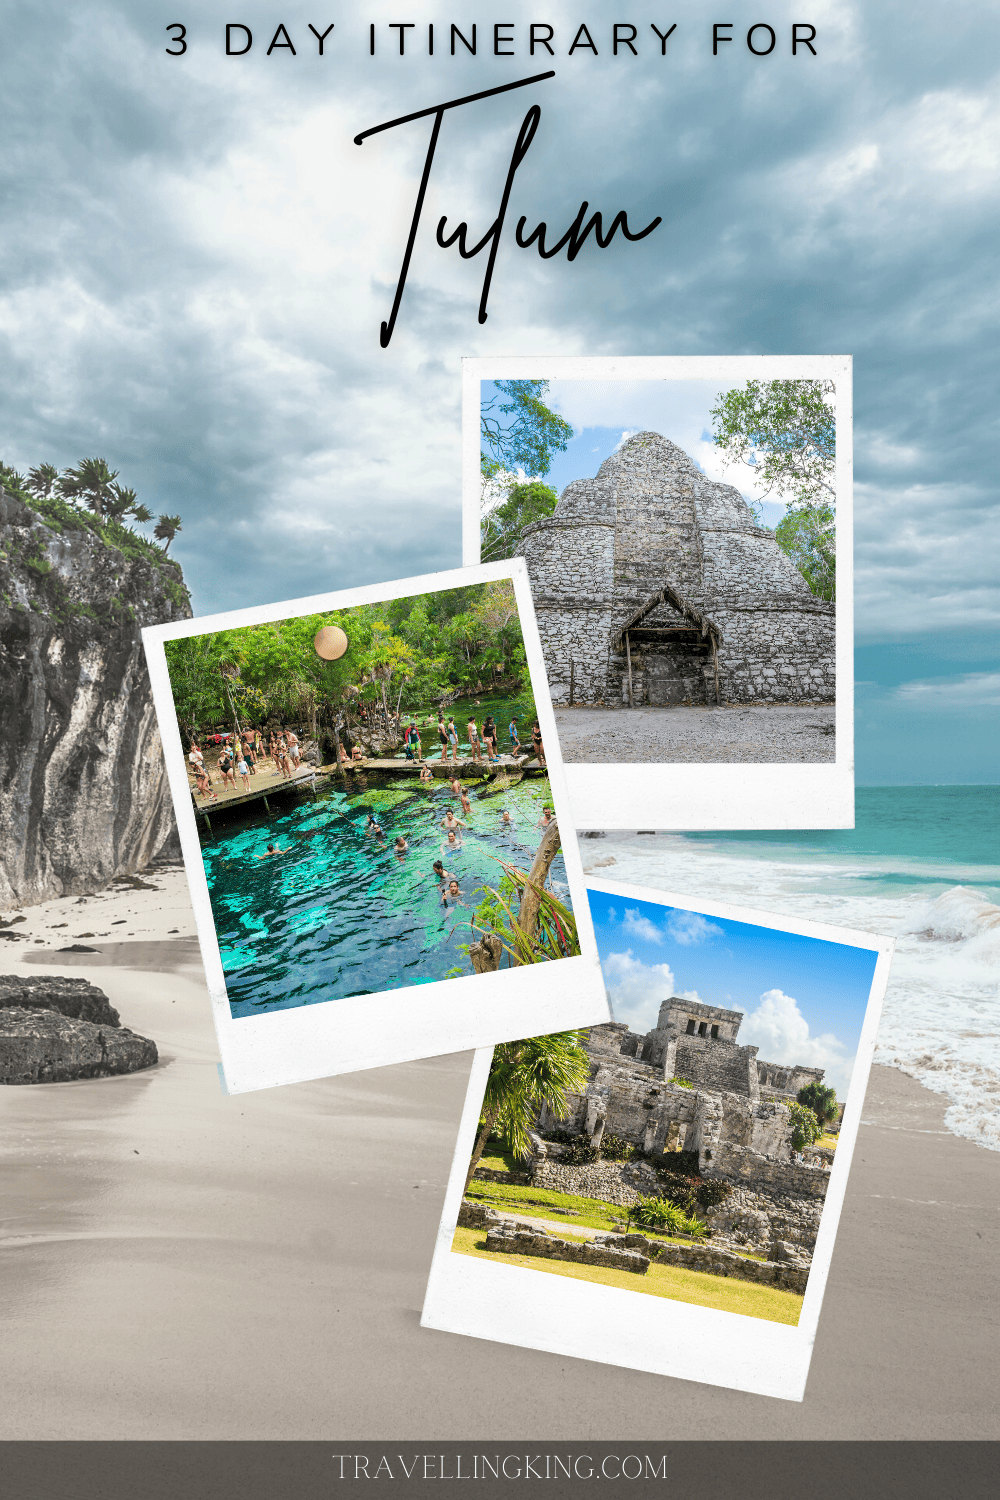 3 Day Itinerary For Tulum